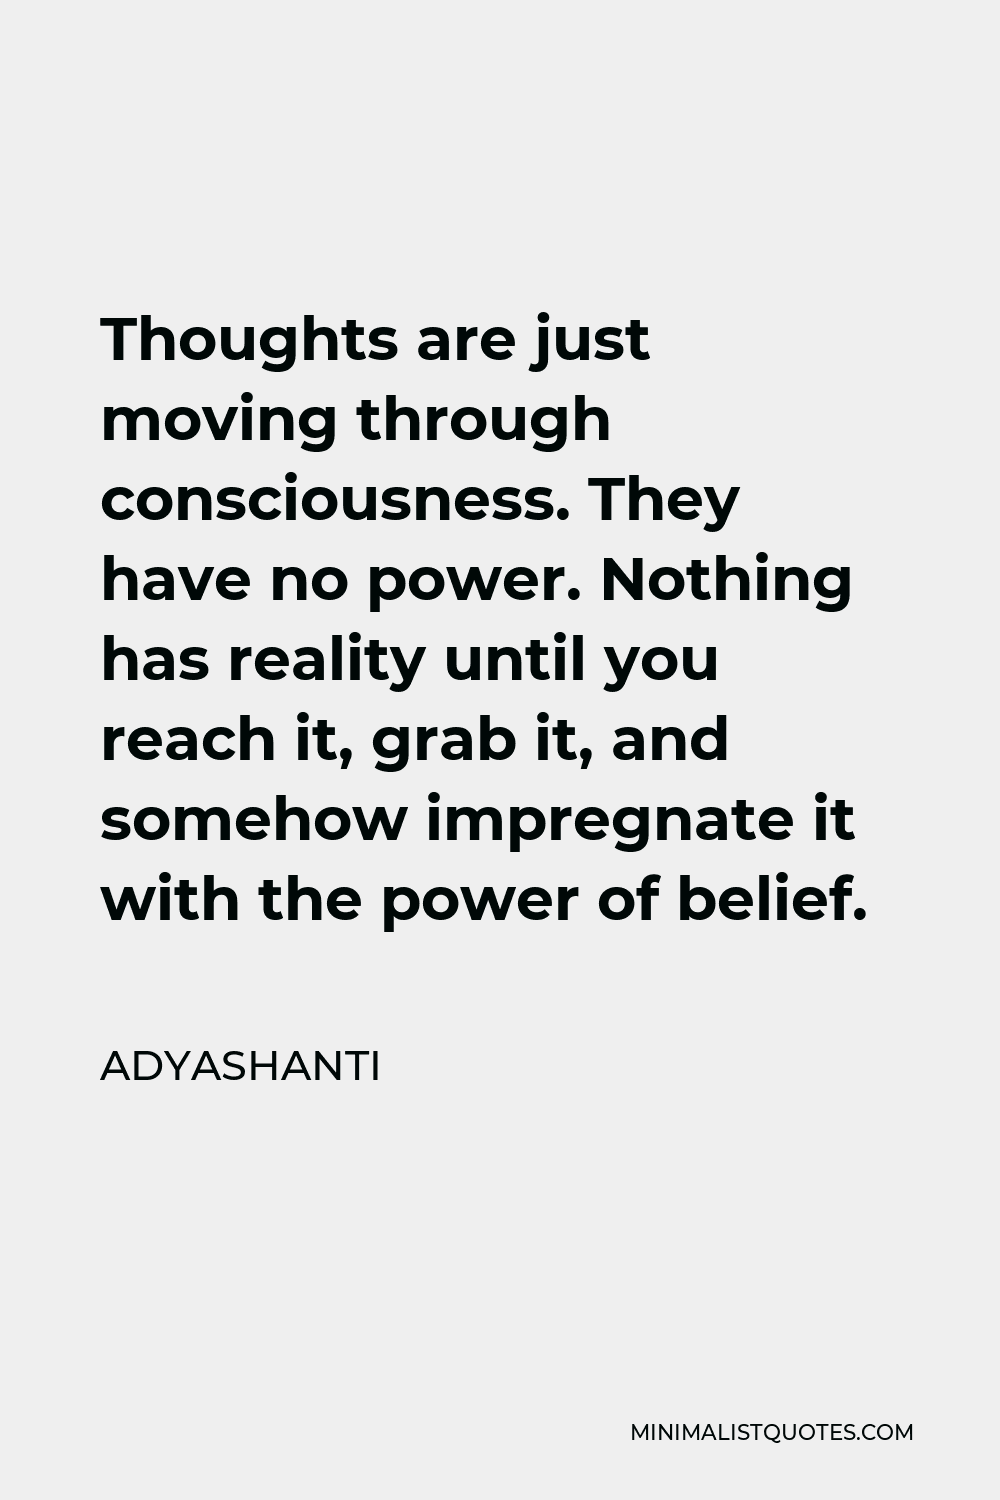 Adyashanti Quote - Thoughts are just moving through consciousness. They have no power. Nothing has reality until you reach it, grab it, and somehow impregnate it with the power of belief.